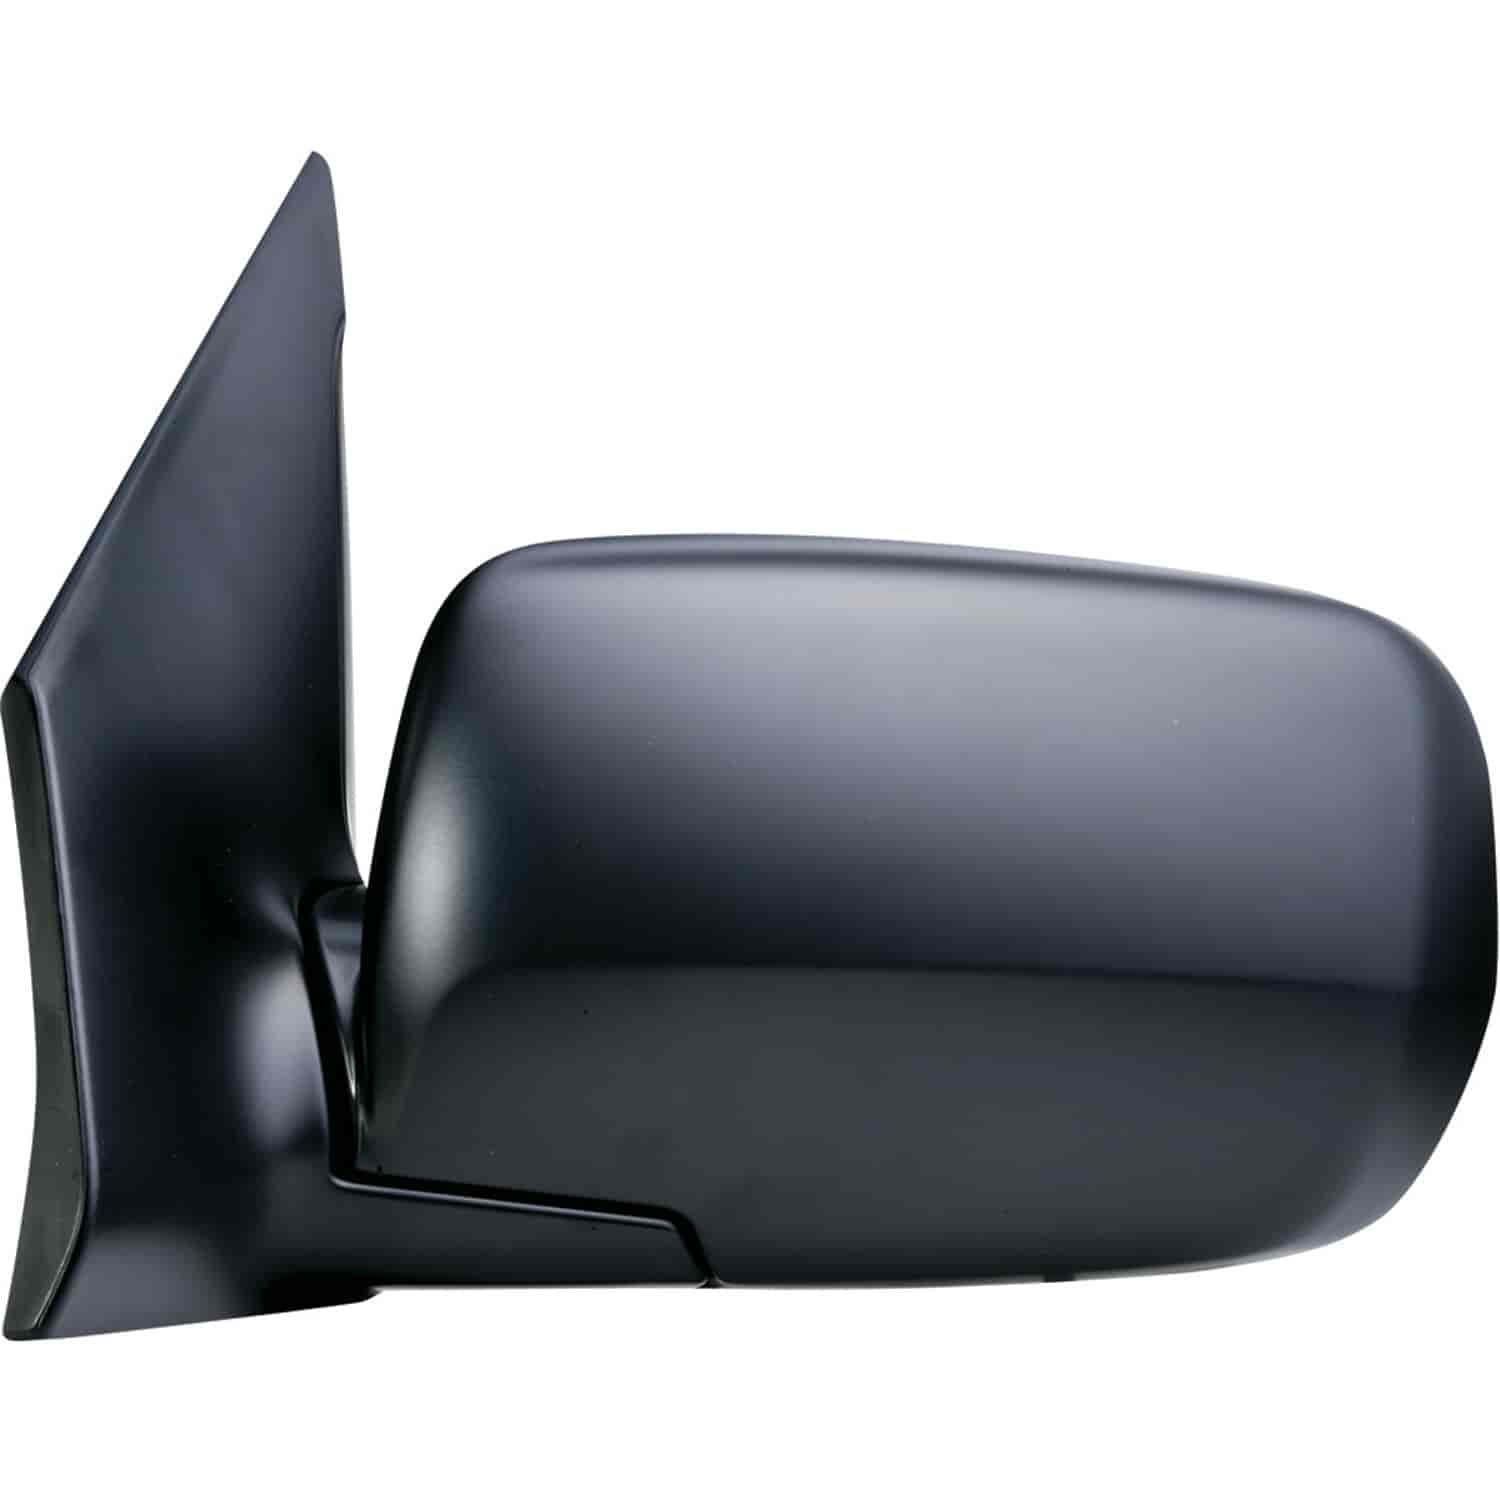 OEM Style Replacement mirror for 03-08 Honda Pilot LX Model driver side mirror tested to fit and fun